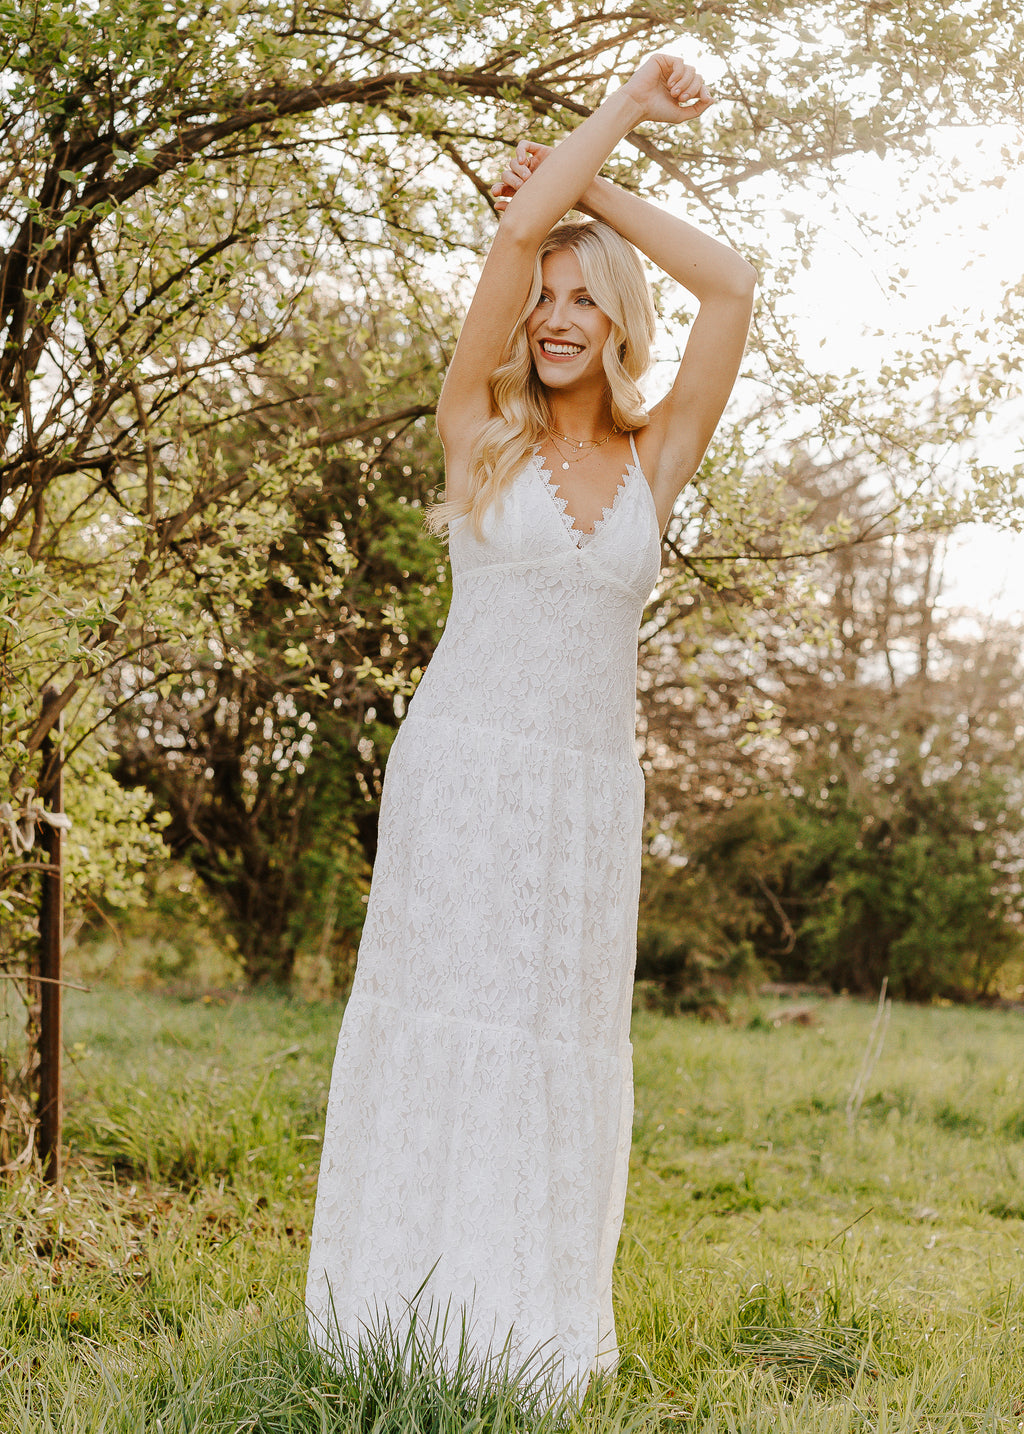 "All About That Lace" Boho Lace Maxi Dress